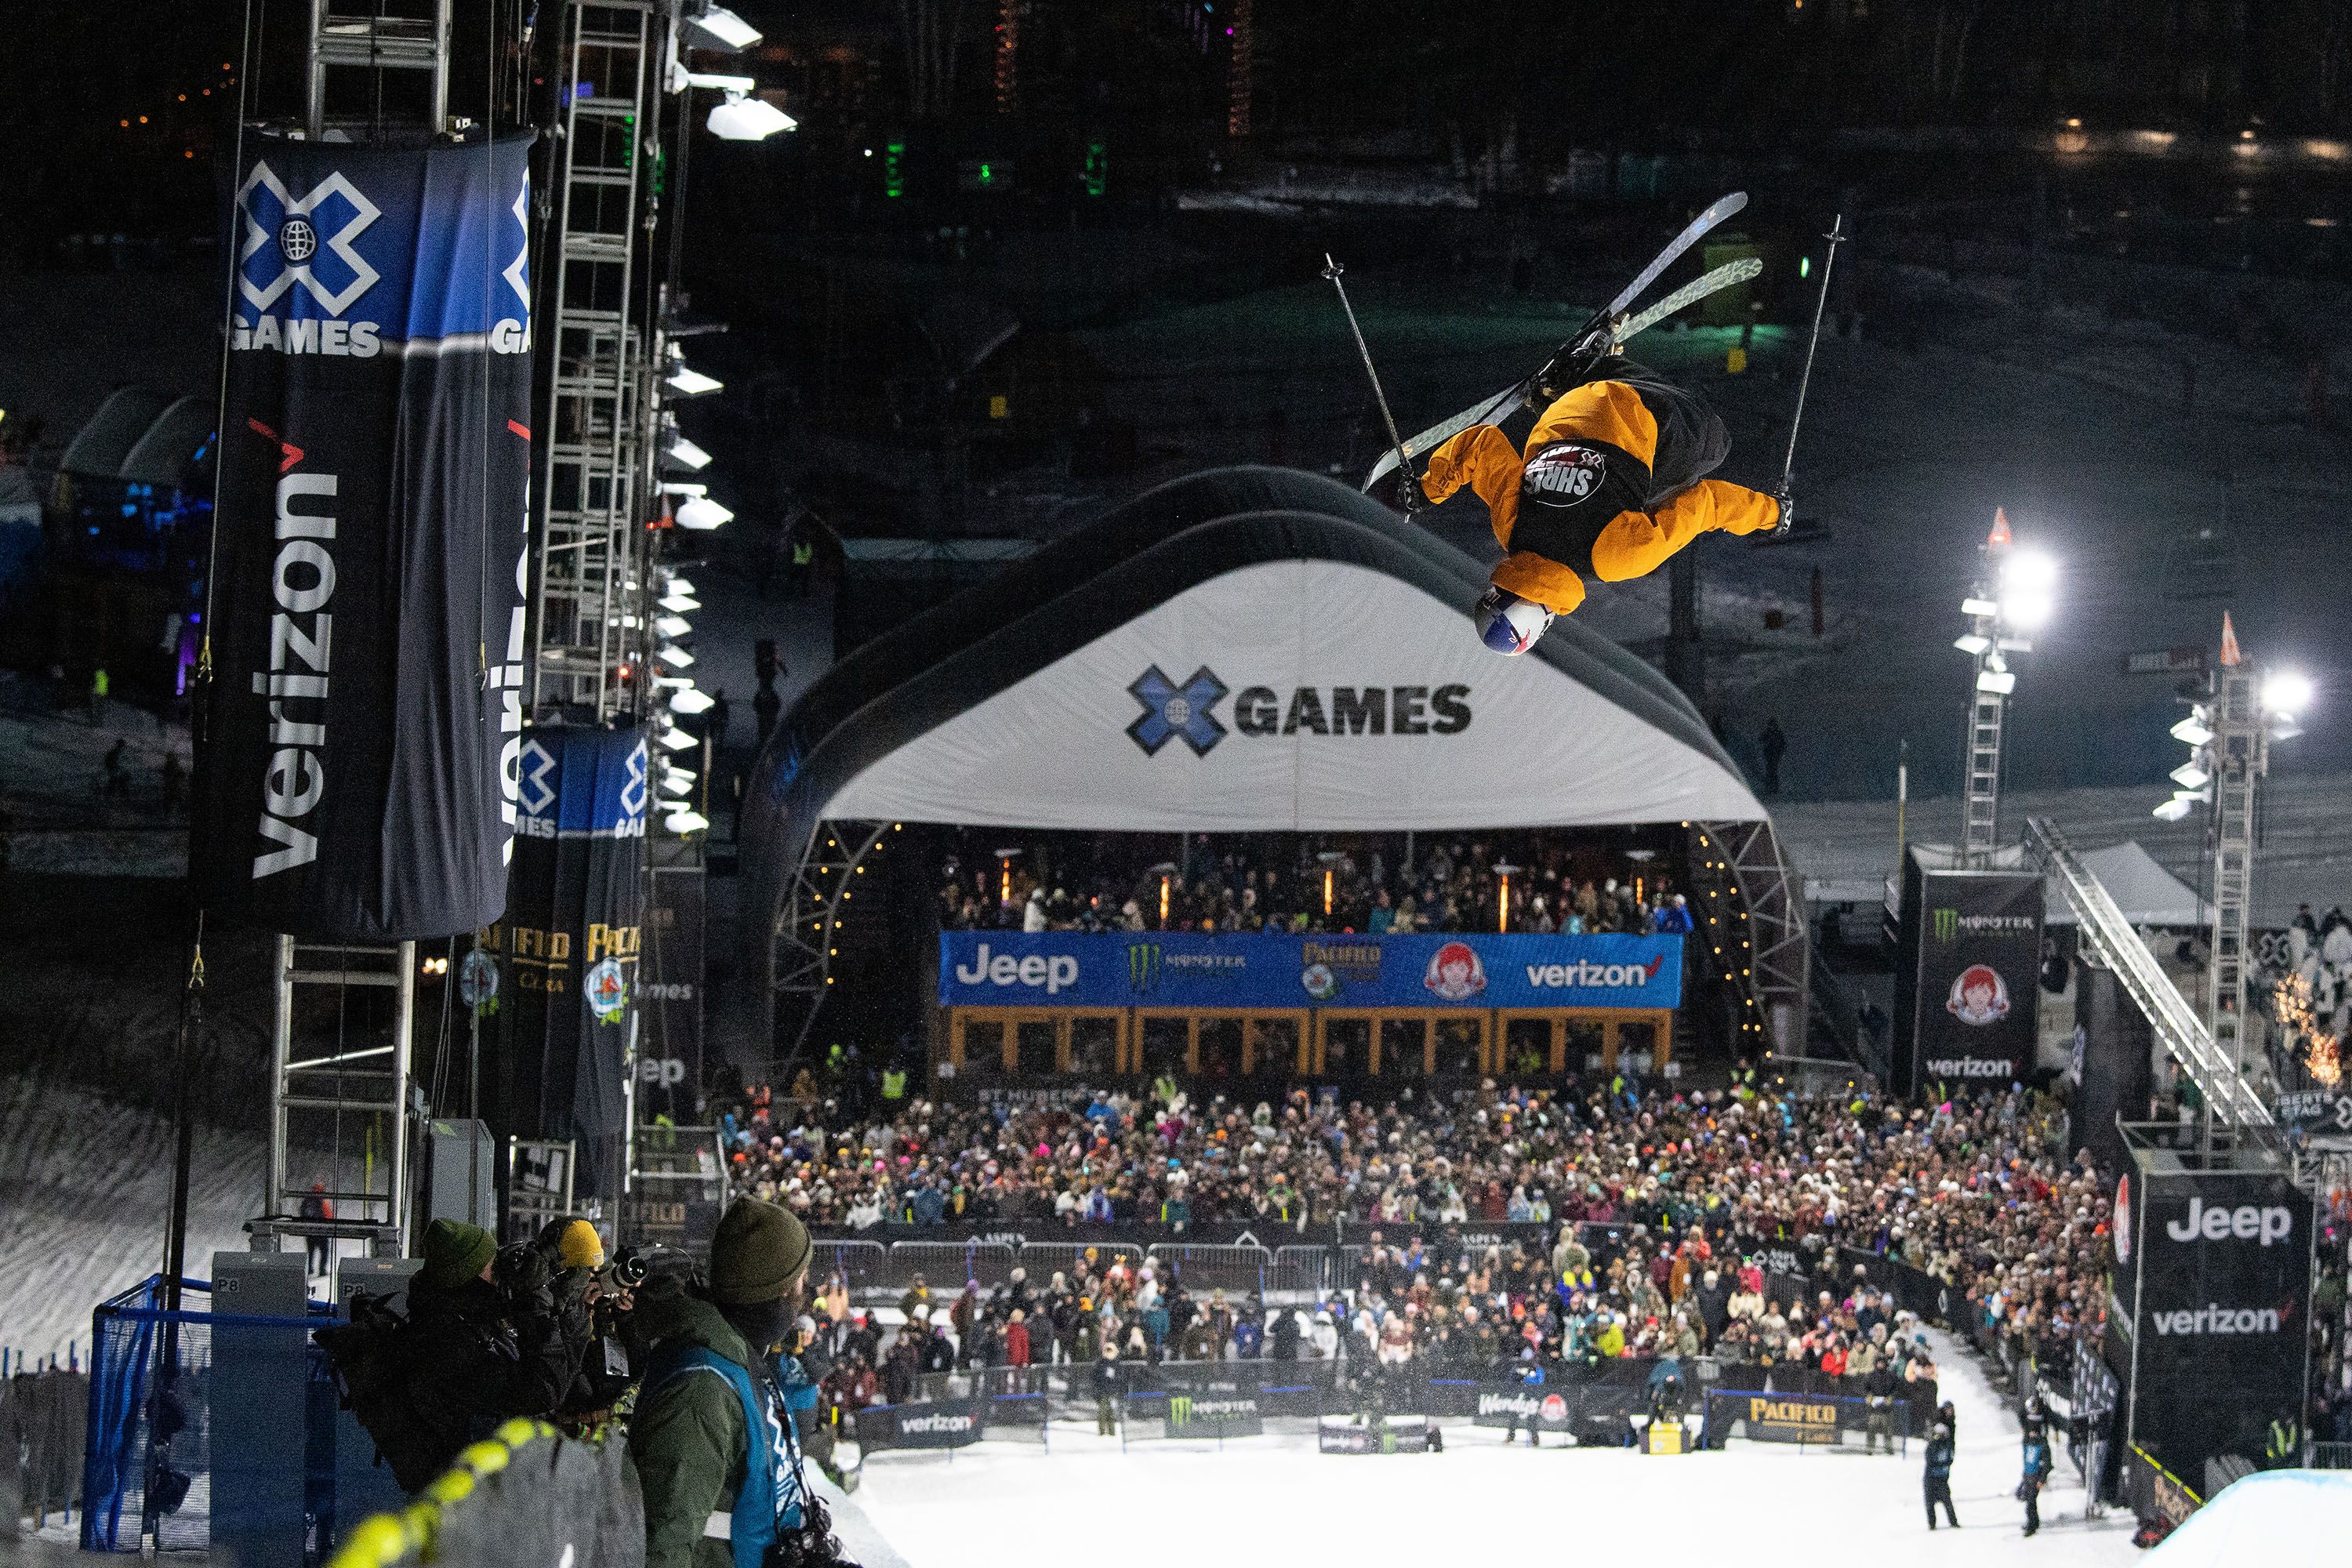 History of the X Games